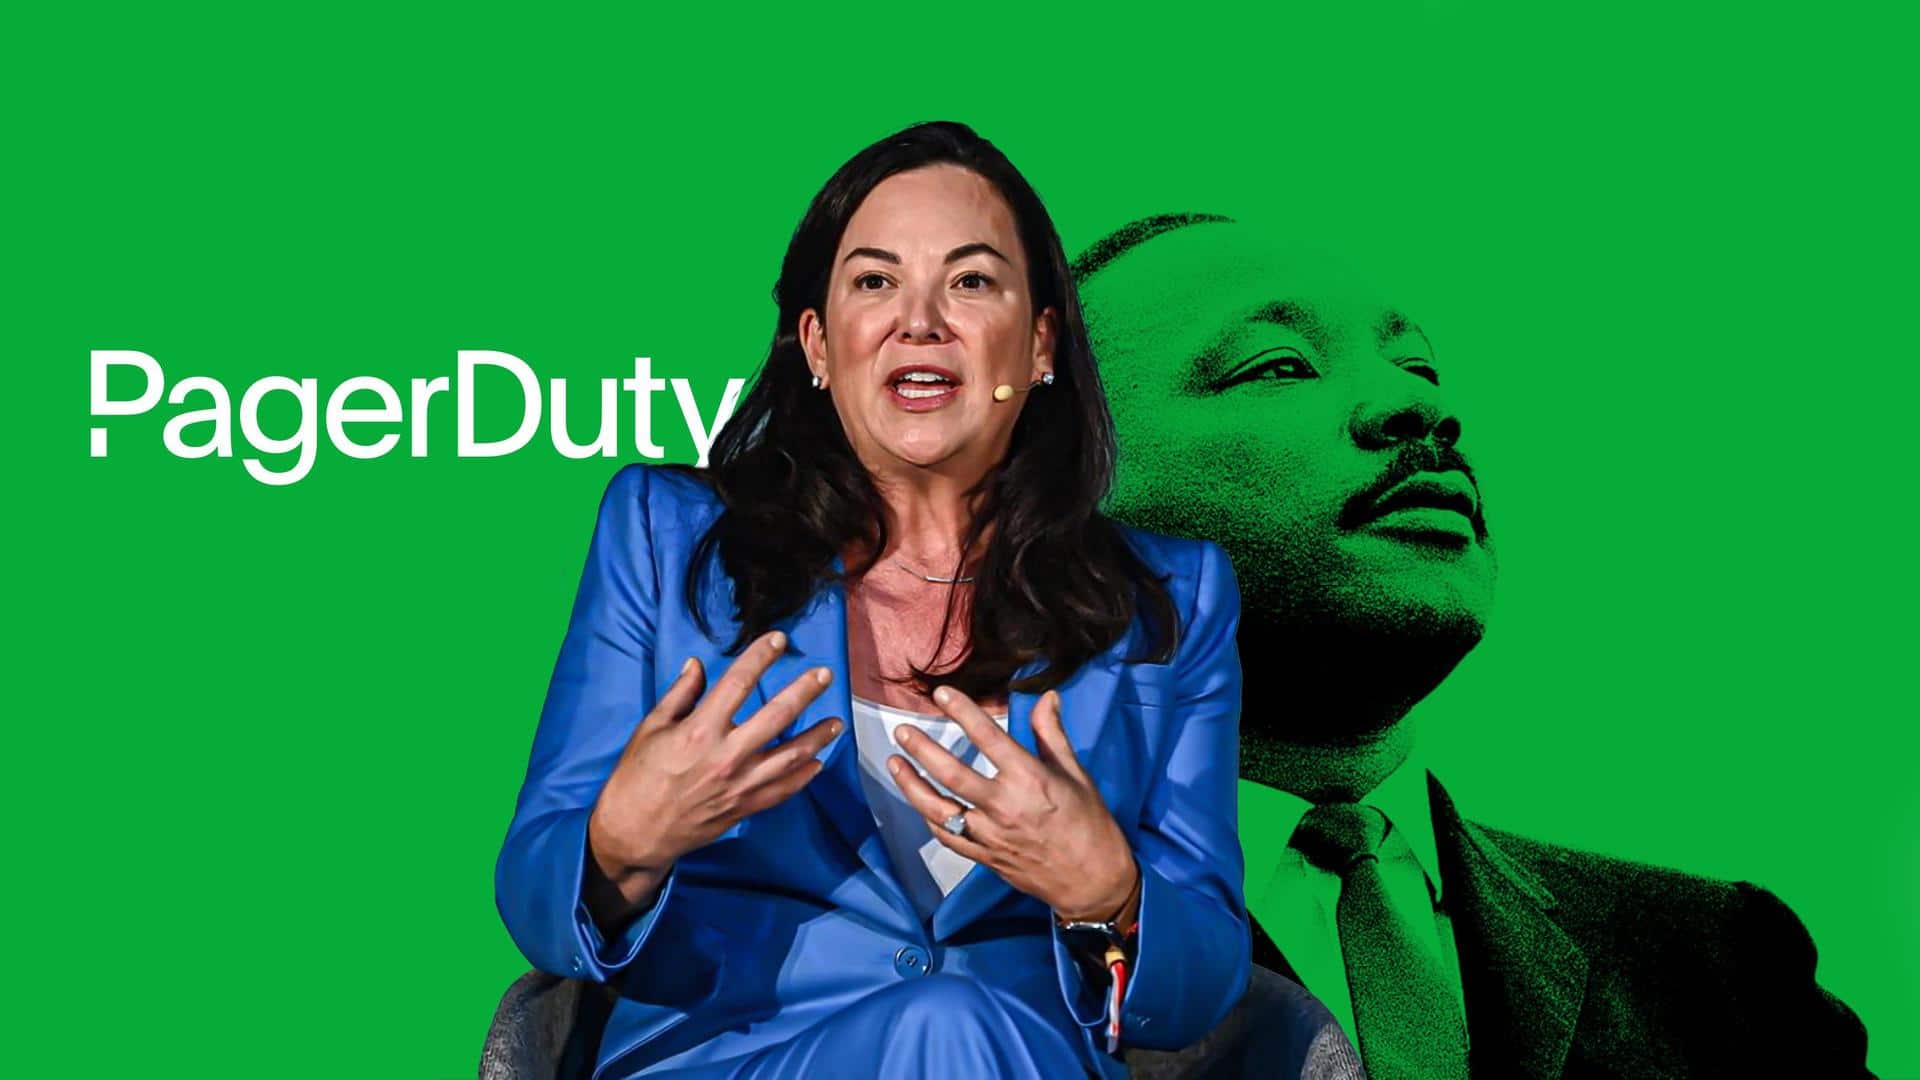 PagerDuty CEO quotes Martin Luther King Jr. in layoff email